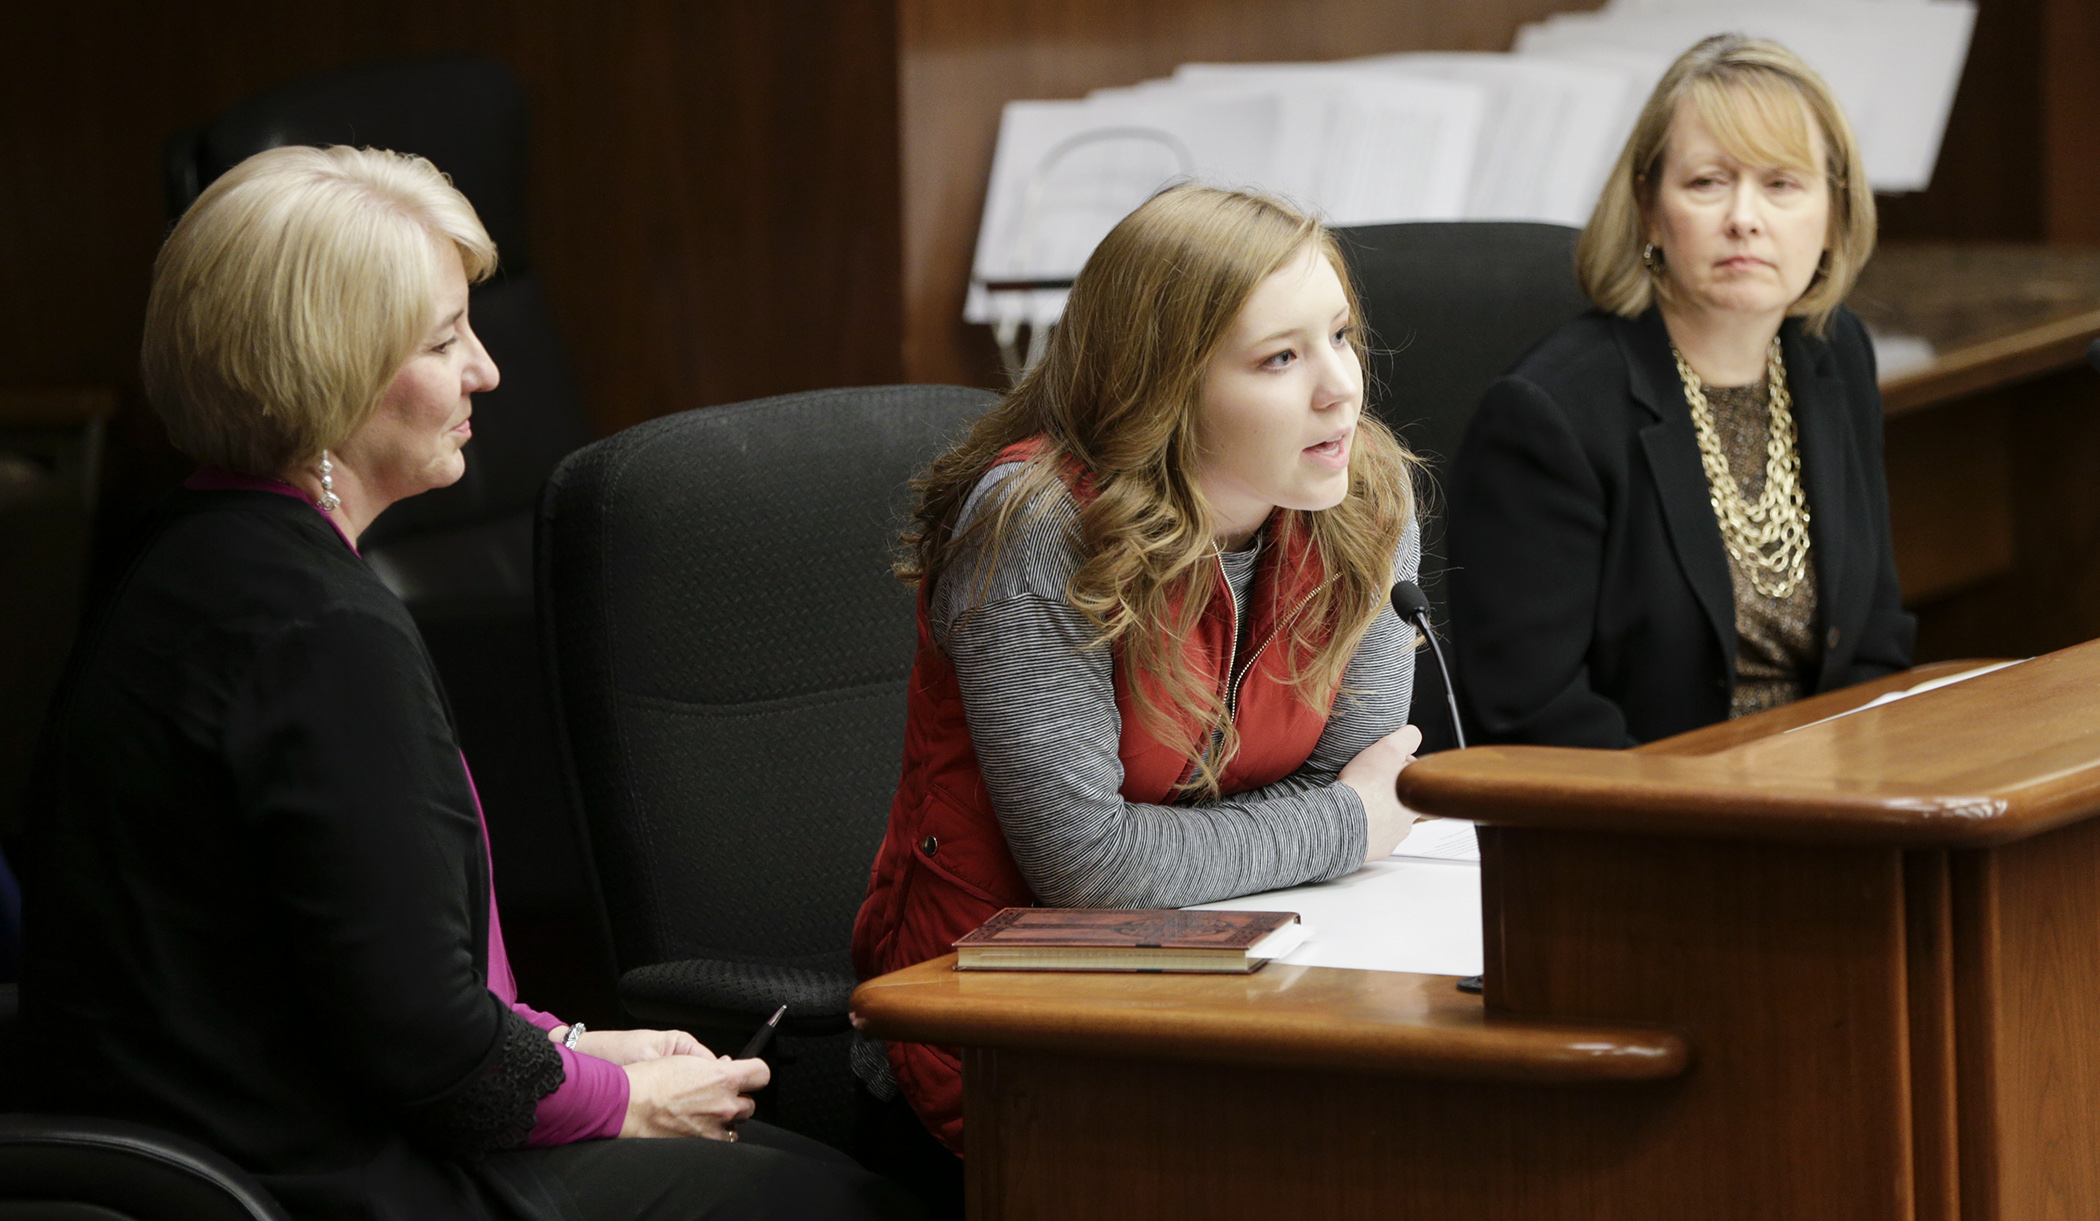 Claire Westra, center, and her mother, Kayla, left, testify about their experience with Post-Secondary Enrollment Options during testimony on HF1906. Sponsored by Rep. Jenifer Loon, right, the bill would modify PSEO Act provisions. Photo by Paul Battaglia